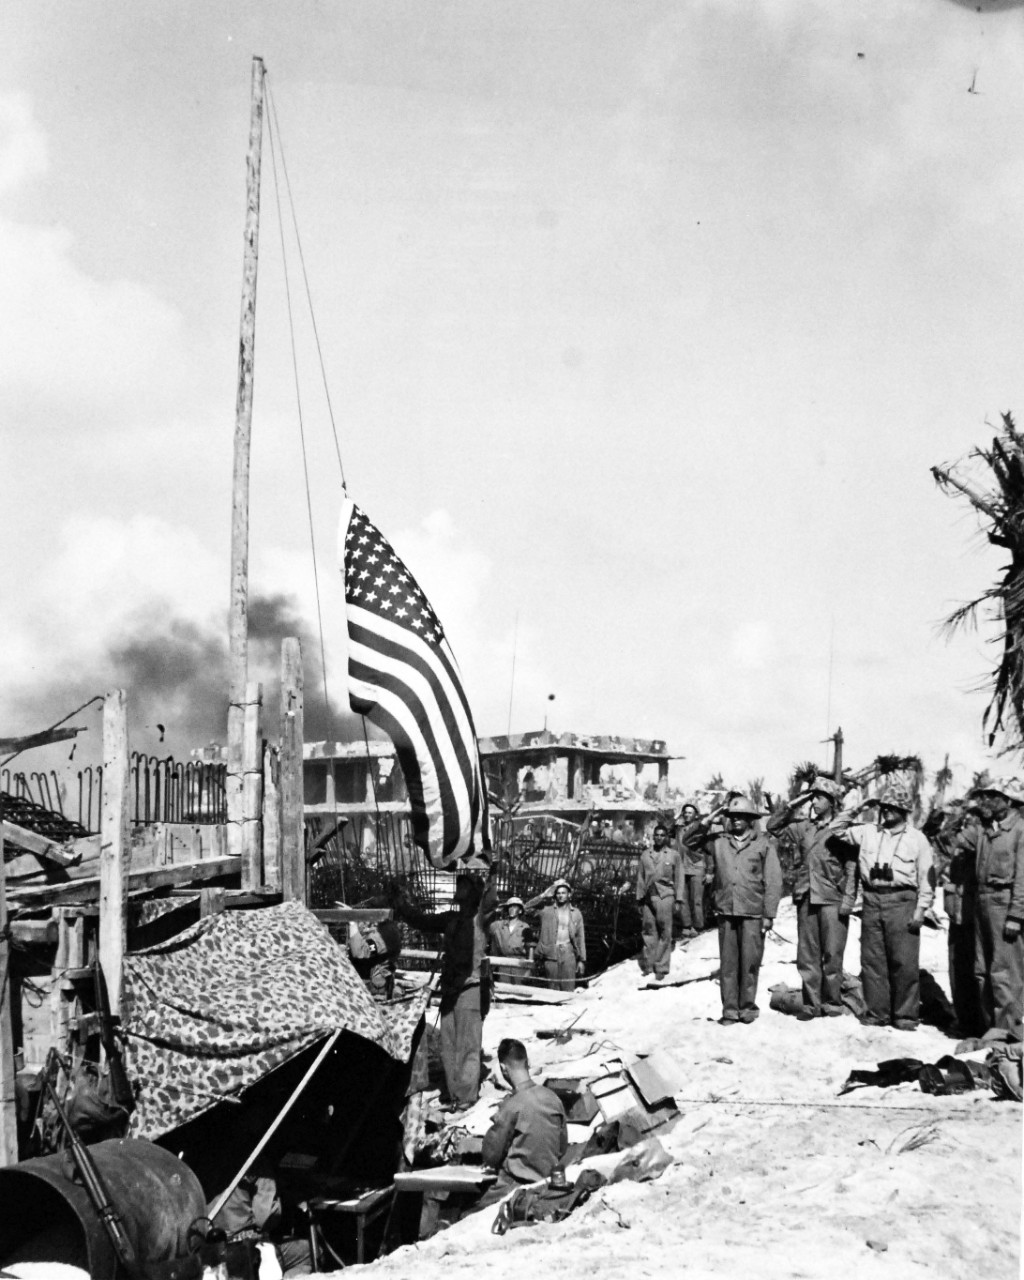 80-G-208974:  Operation Flintlock, January-February 1944.    Fourth Marine Division attack on Roi Island, Kwajalein Atoll, Marshall Islands, February 1-2, 1944.   Shown:  U.S. Marines halt to salute the flag as it goes up soon after the capture of the Marshall islands stronghold from the Japanese.  In the background is the remains of a three-story concrete block-house knocked out by the terrific bombardment by land, sea, and air.    Official U.S. Navy photograph, now in the collections of the National Archives.  (2017/07/25).  